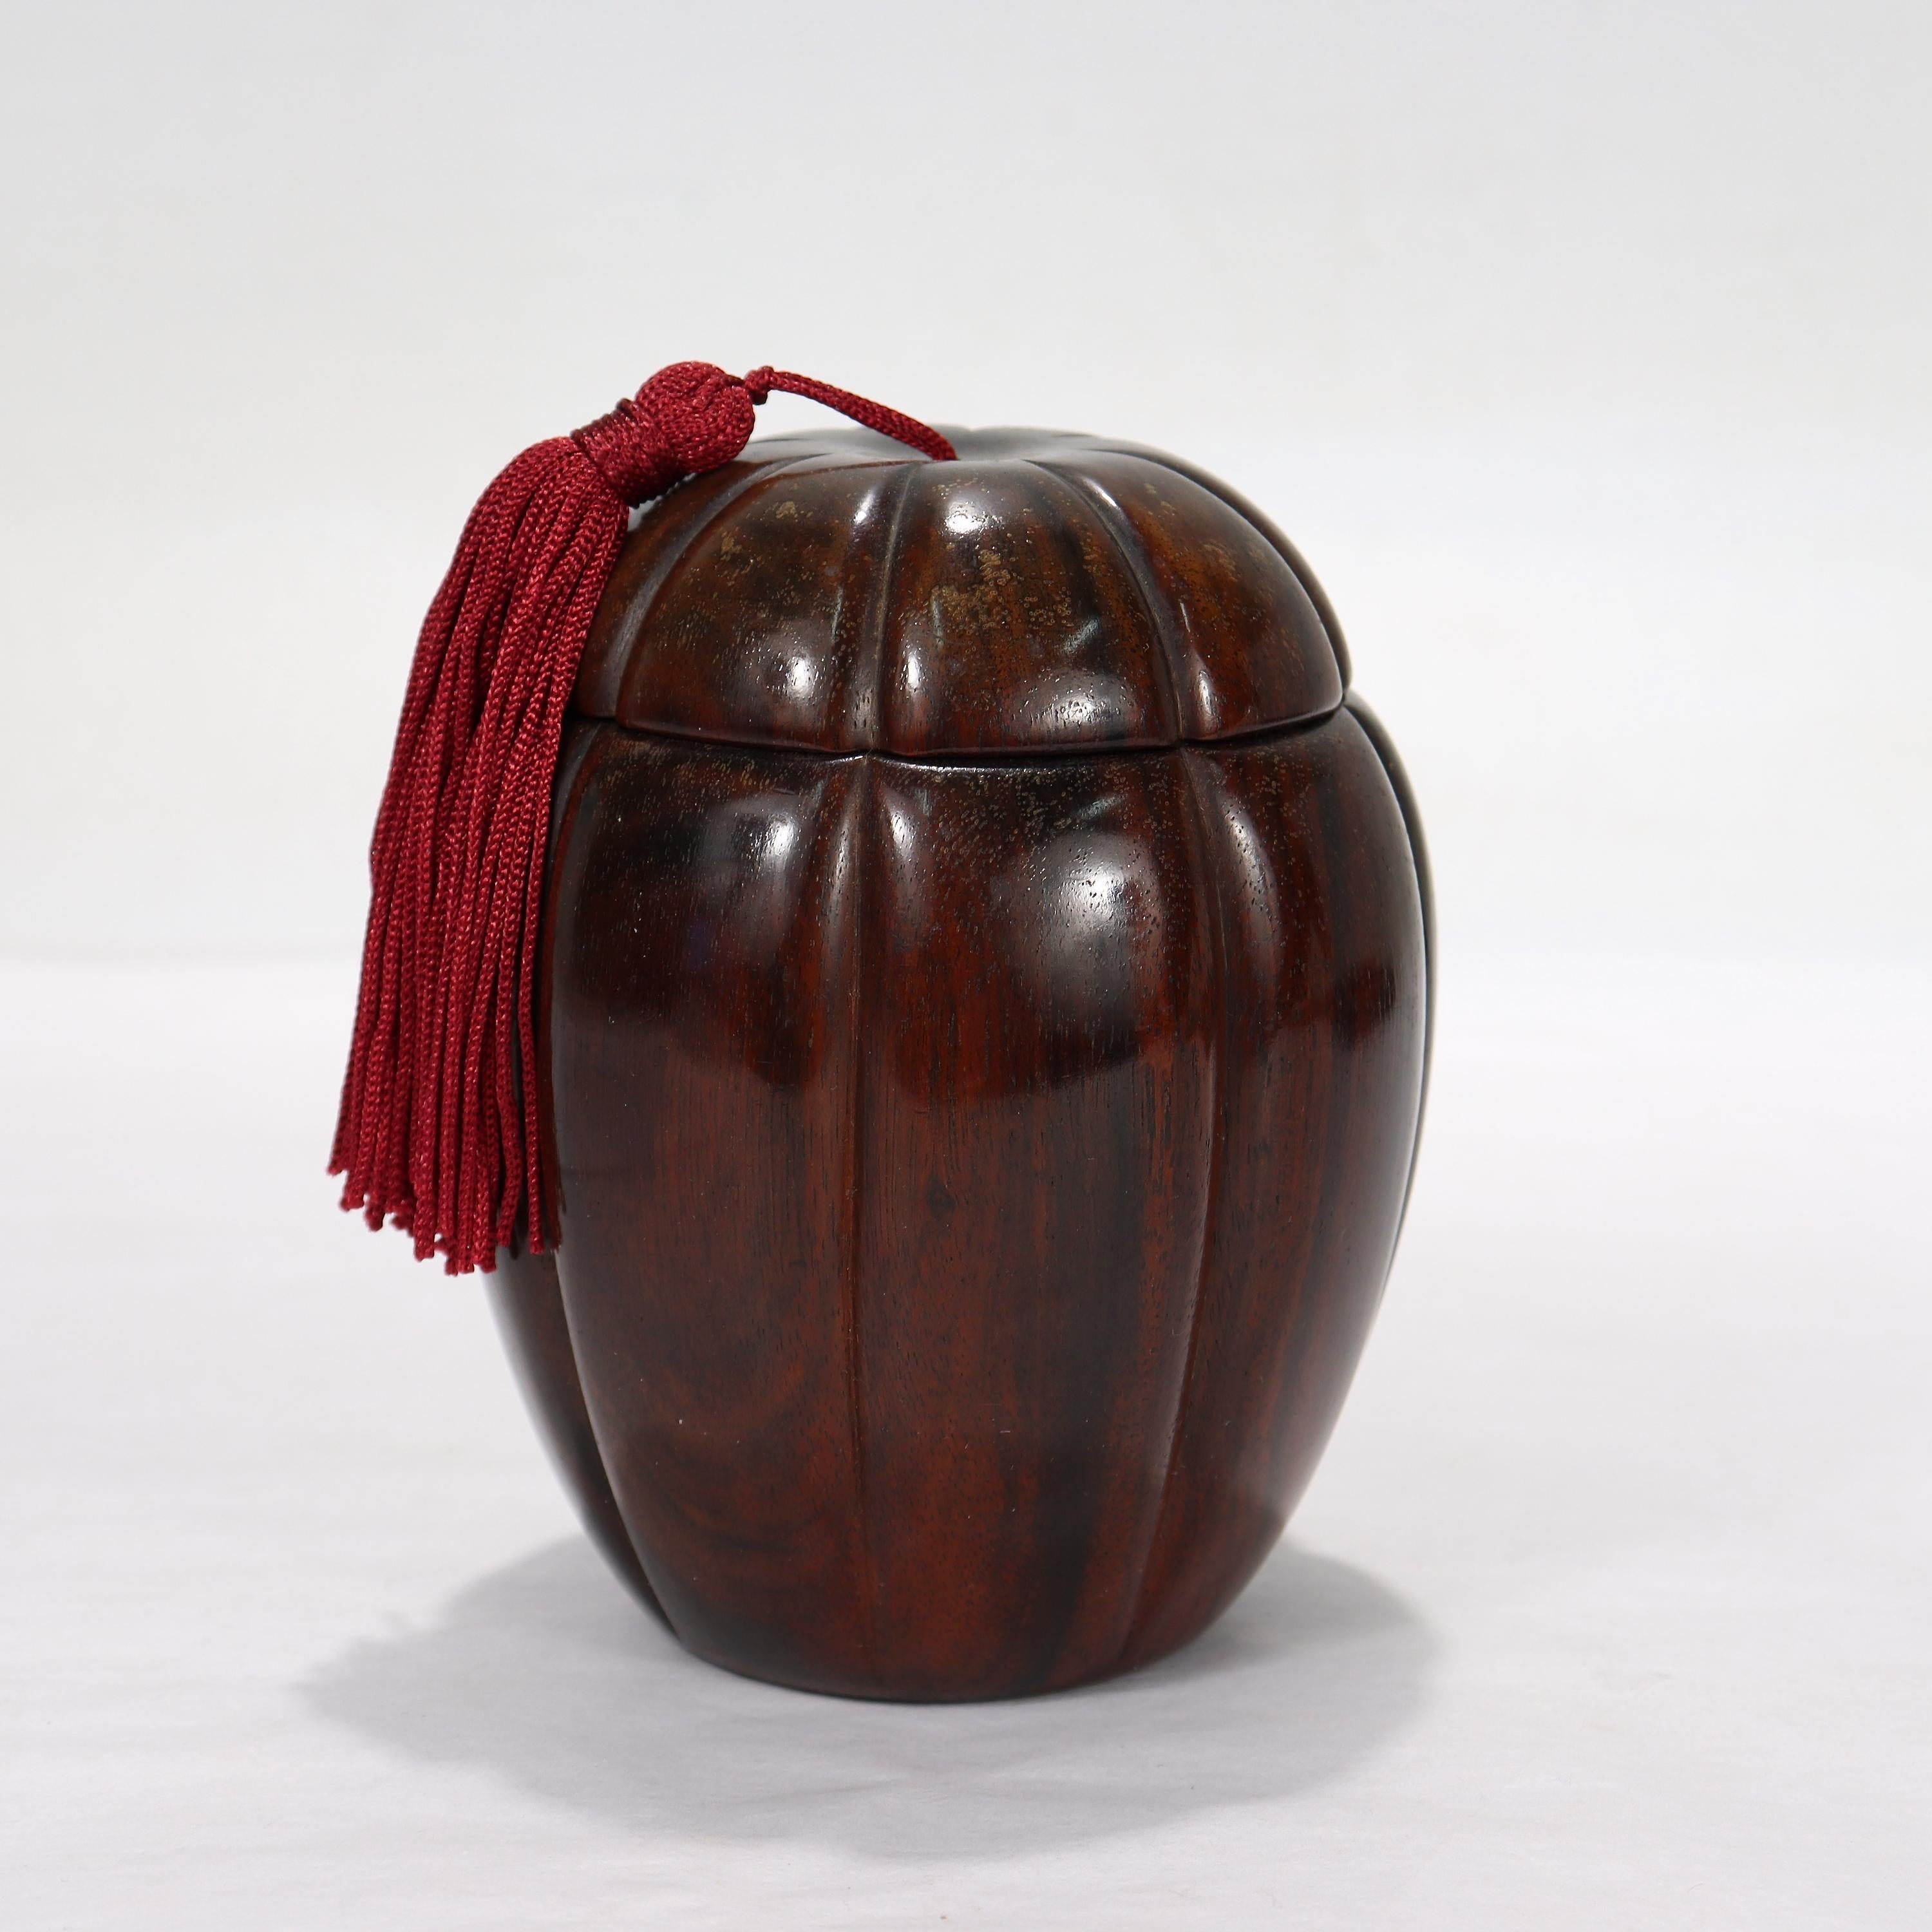 A fine antique Art Deco ebony box or jar.

By Cardeilhac, Paris.

With a carved melon shaped body and conforming lid.

In Macassar ebony.

Marked to the base for Cardeilhac Paris.

Simply an exquisite Art Deco box from one of the world's